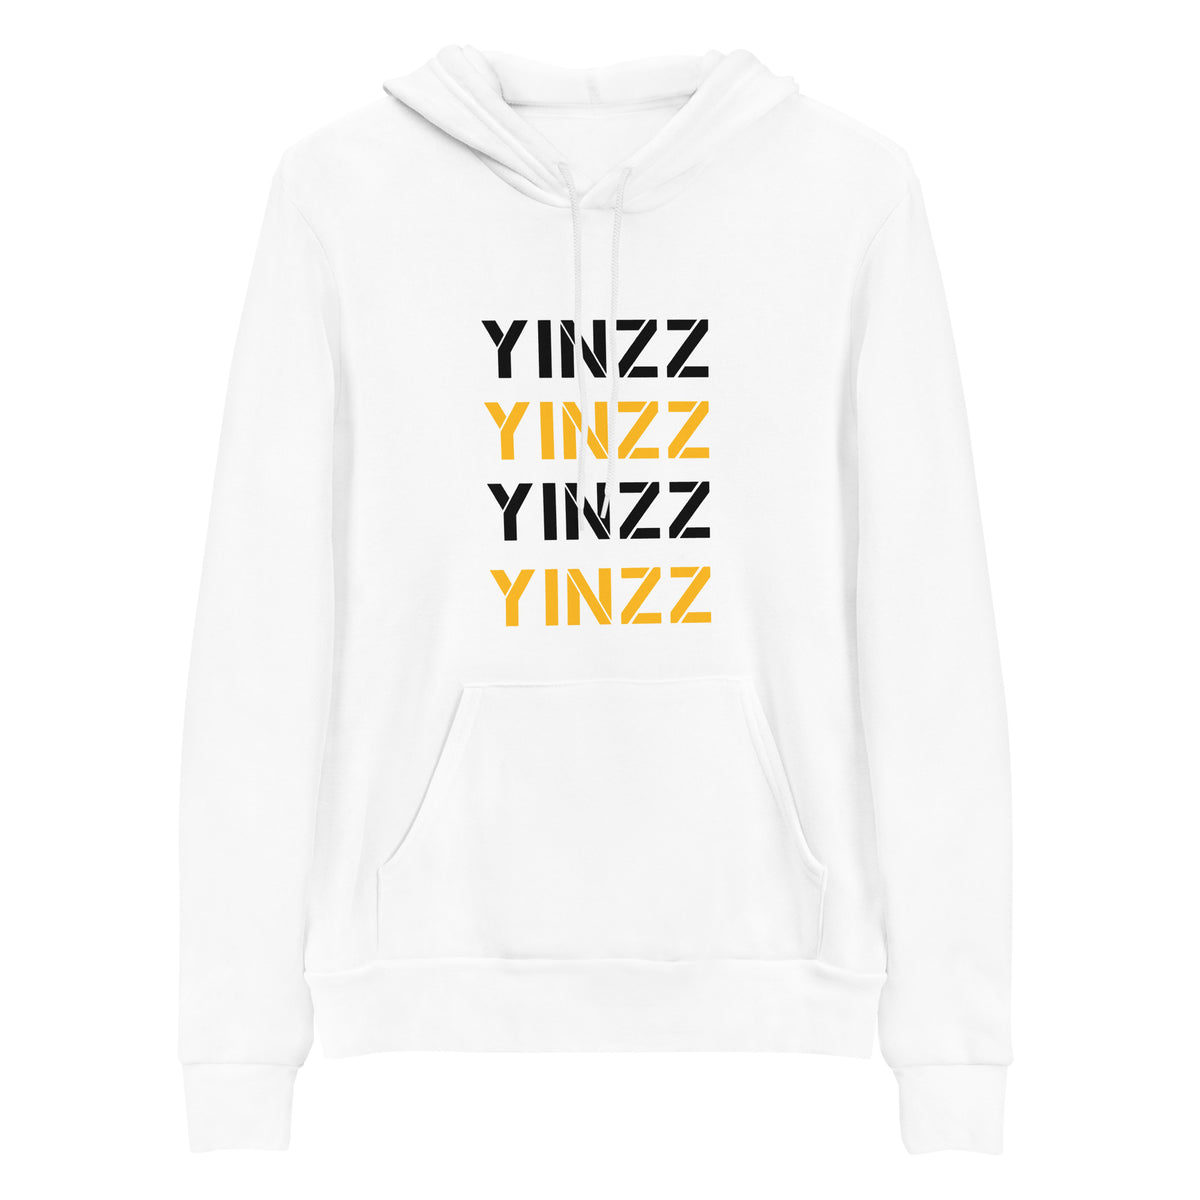 Yinzz On Repeat | YINZZ Hoodie